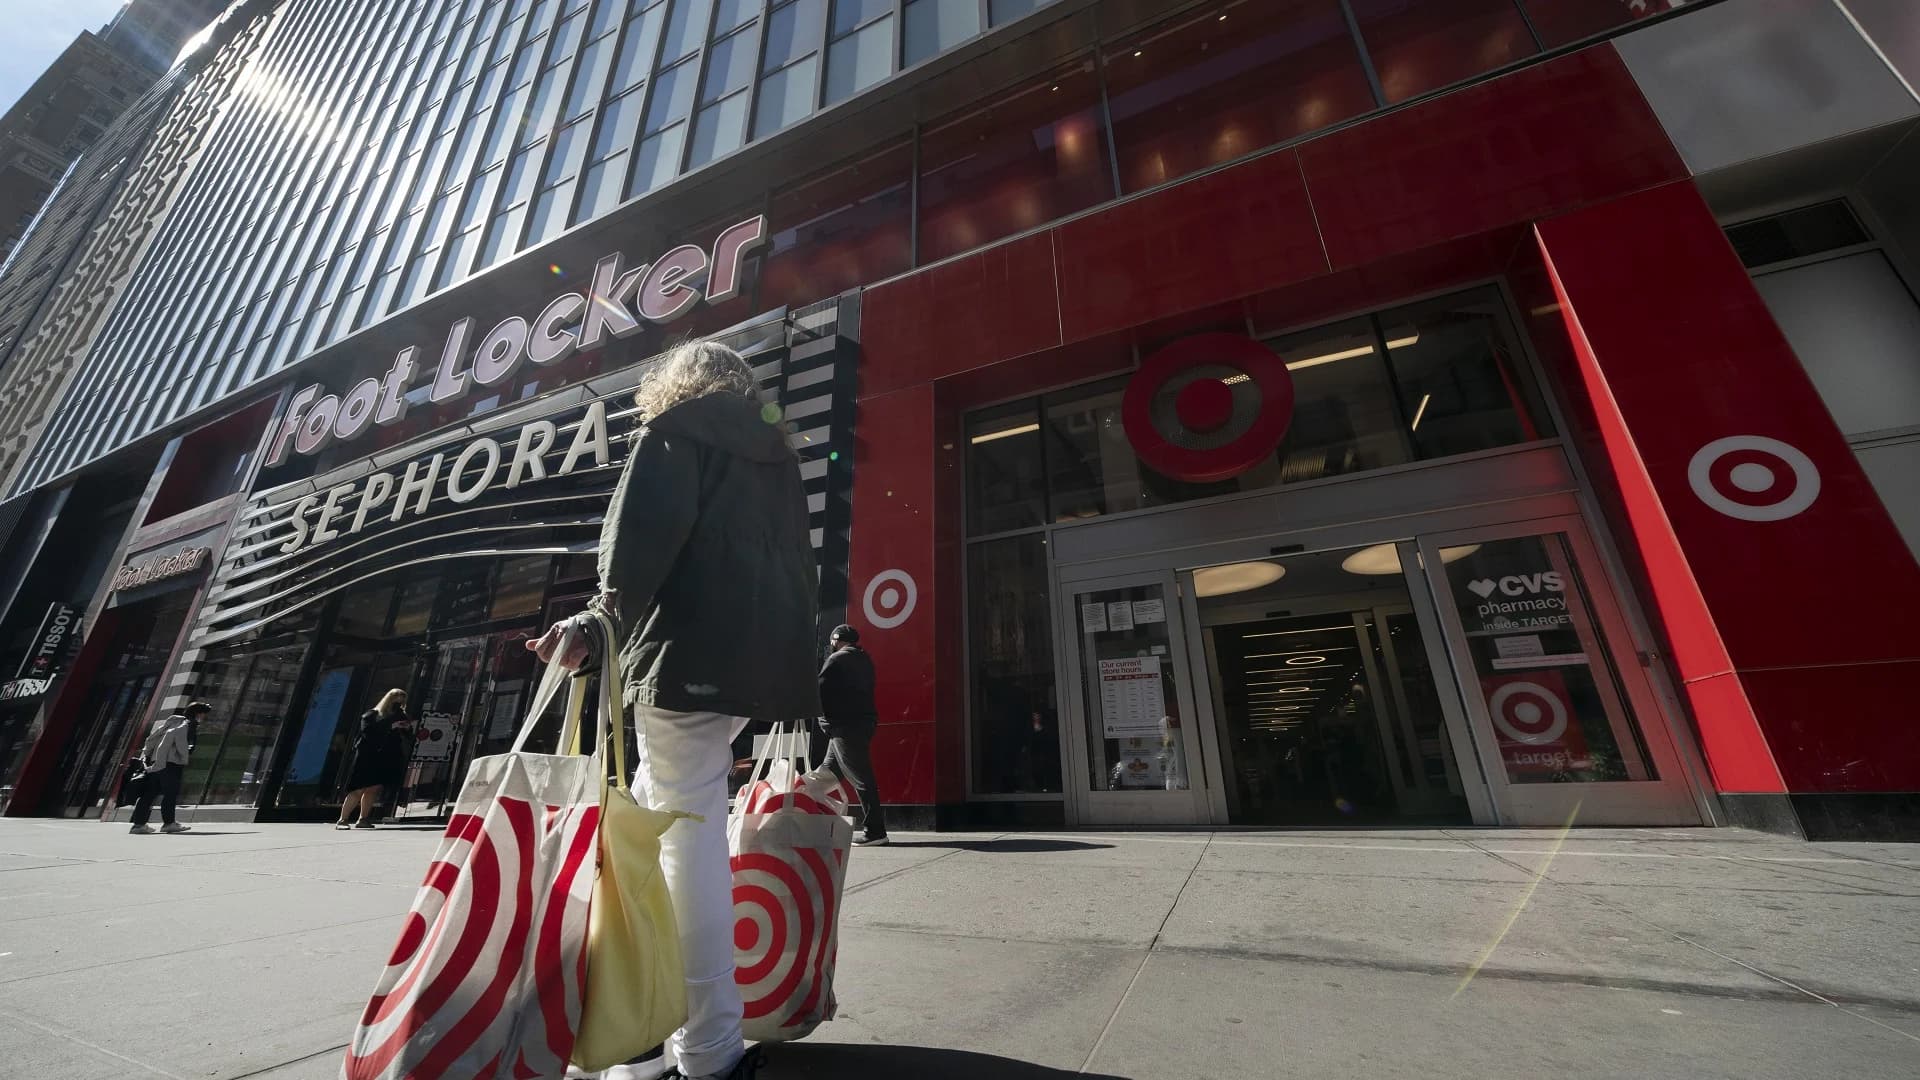 Mask or no mask? Here's a list of where major retailers stand on mask policy